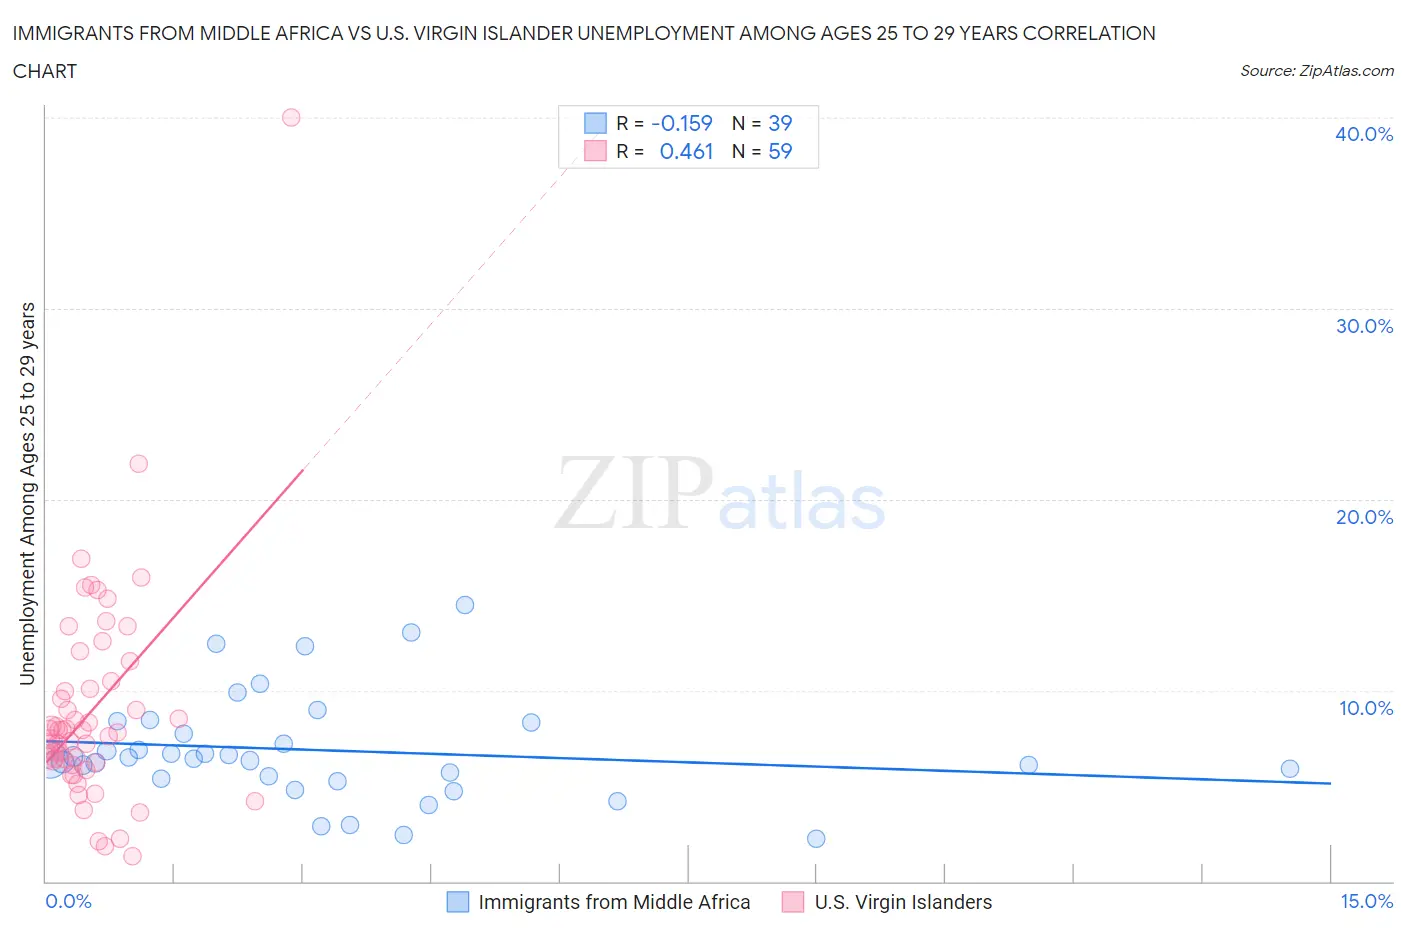 Immigrants from Middle Africa vs U.S. Virgin Islander Unemployment Among Ages 25 to 29 years